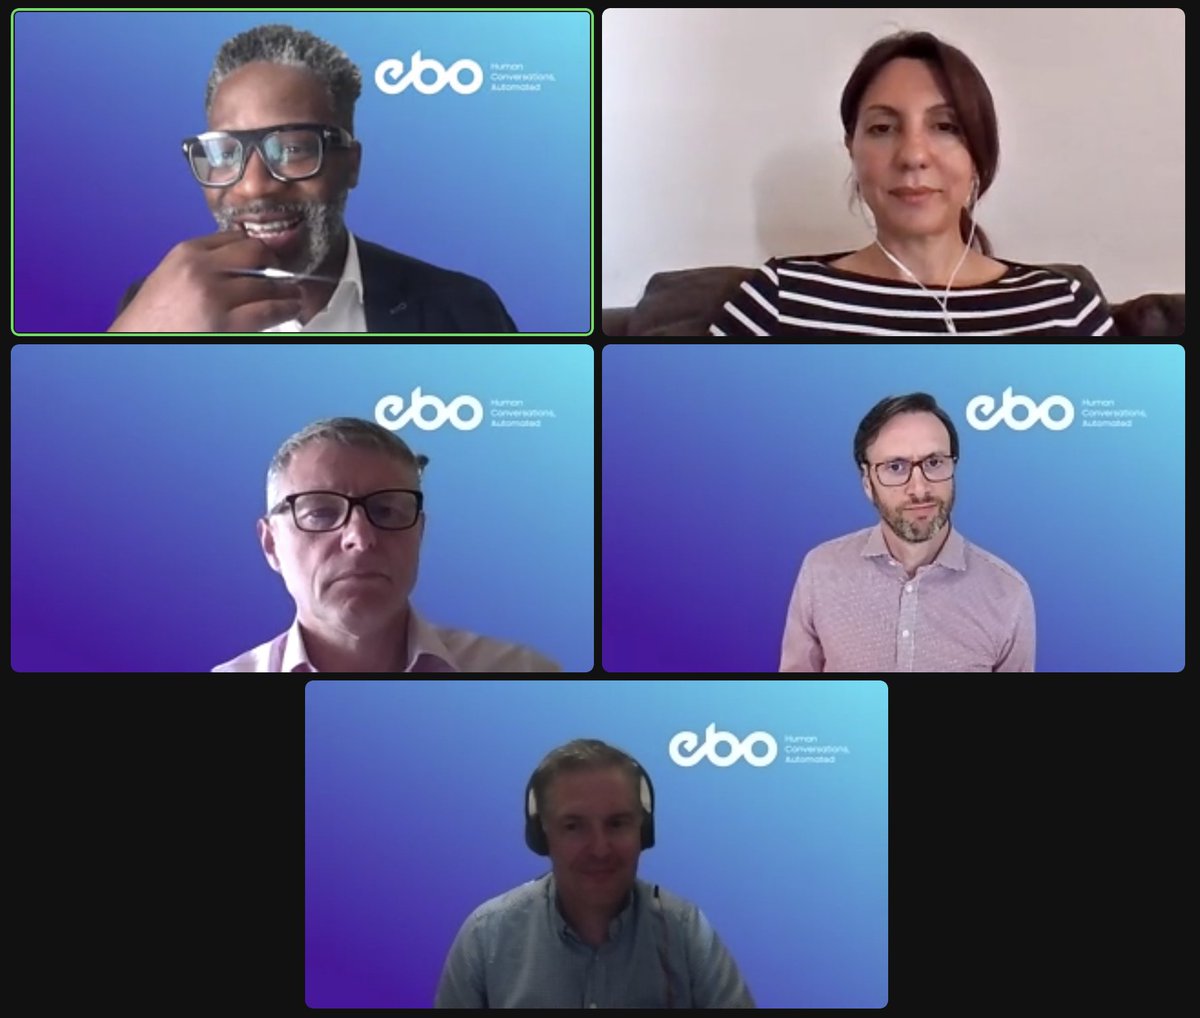 The @EBO_ai webinar on #AI in #healthcare kicks off to a great start. Working with @NHSuk to improve patient experience & reduce waiting lists through #automation is a key opportunity, and mission, for us.